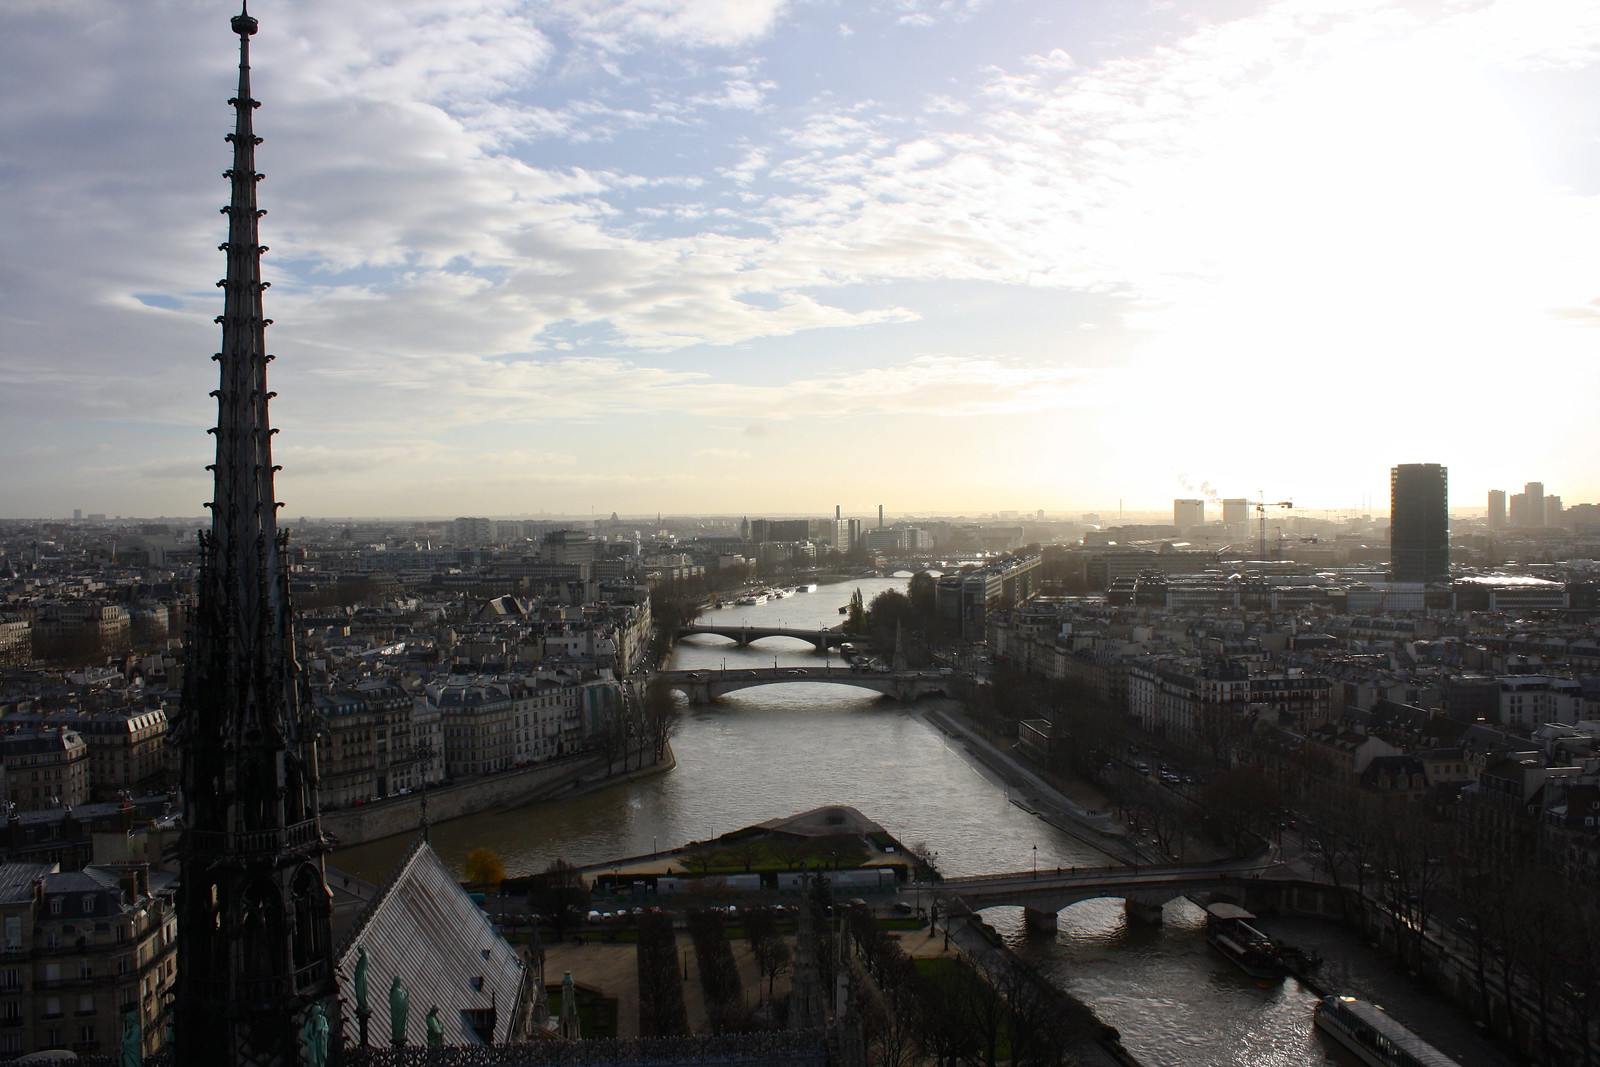 Paris, France, seen from Notre-Dame Cathedral